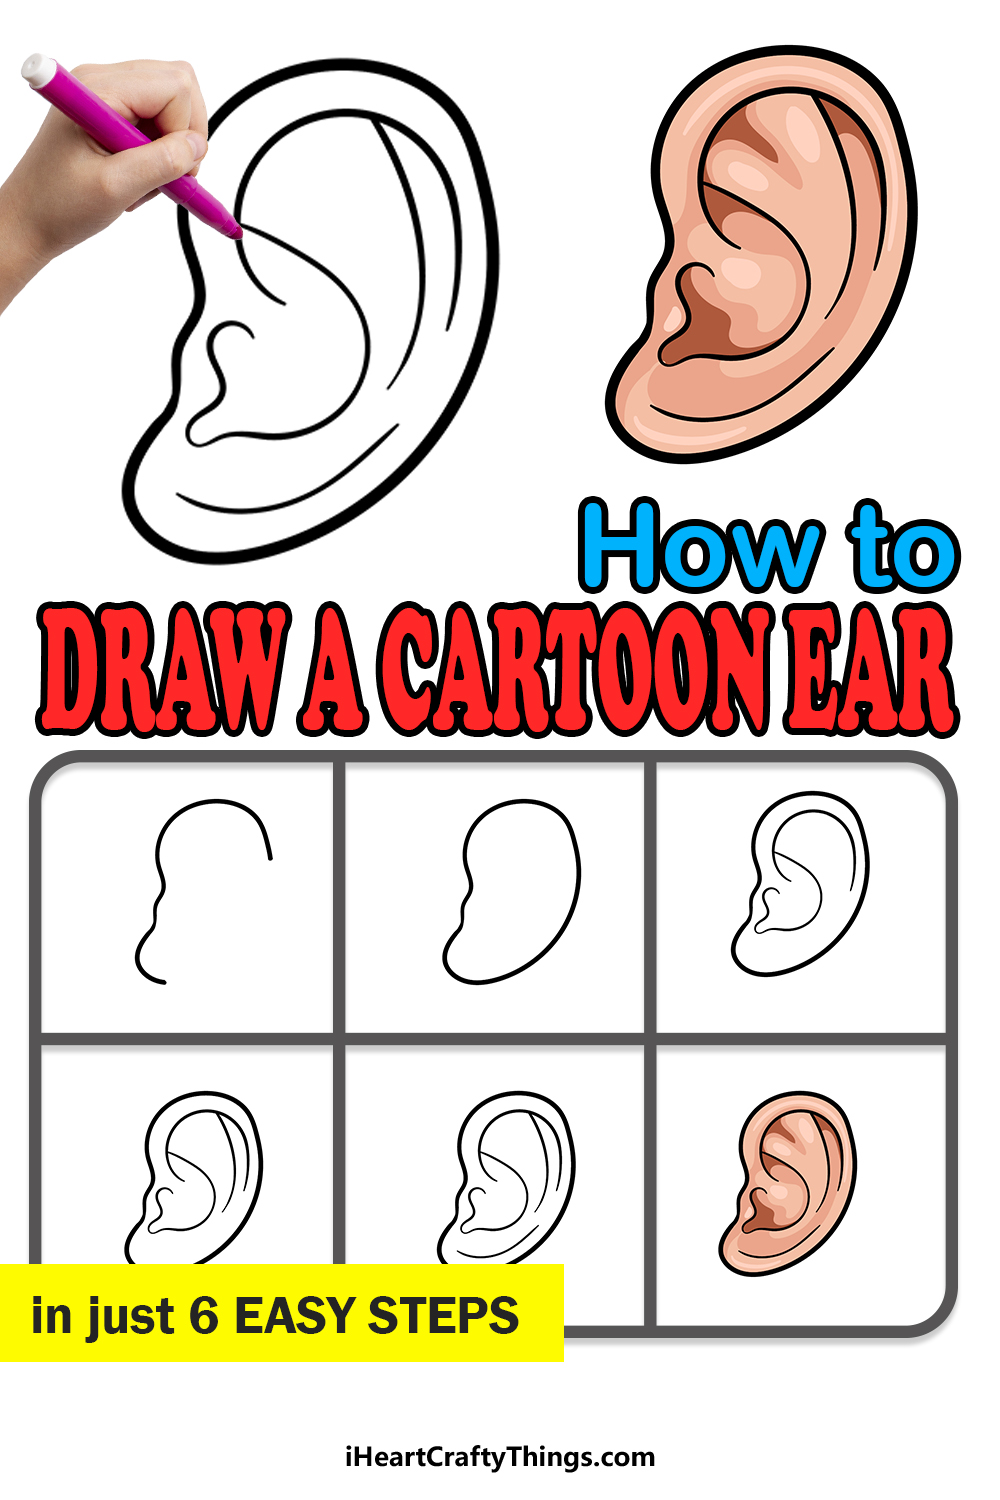 how to draw a cartoon ear in 6 easy steps